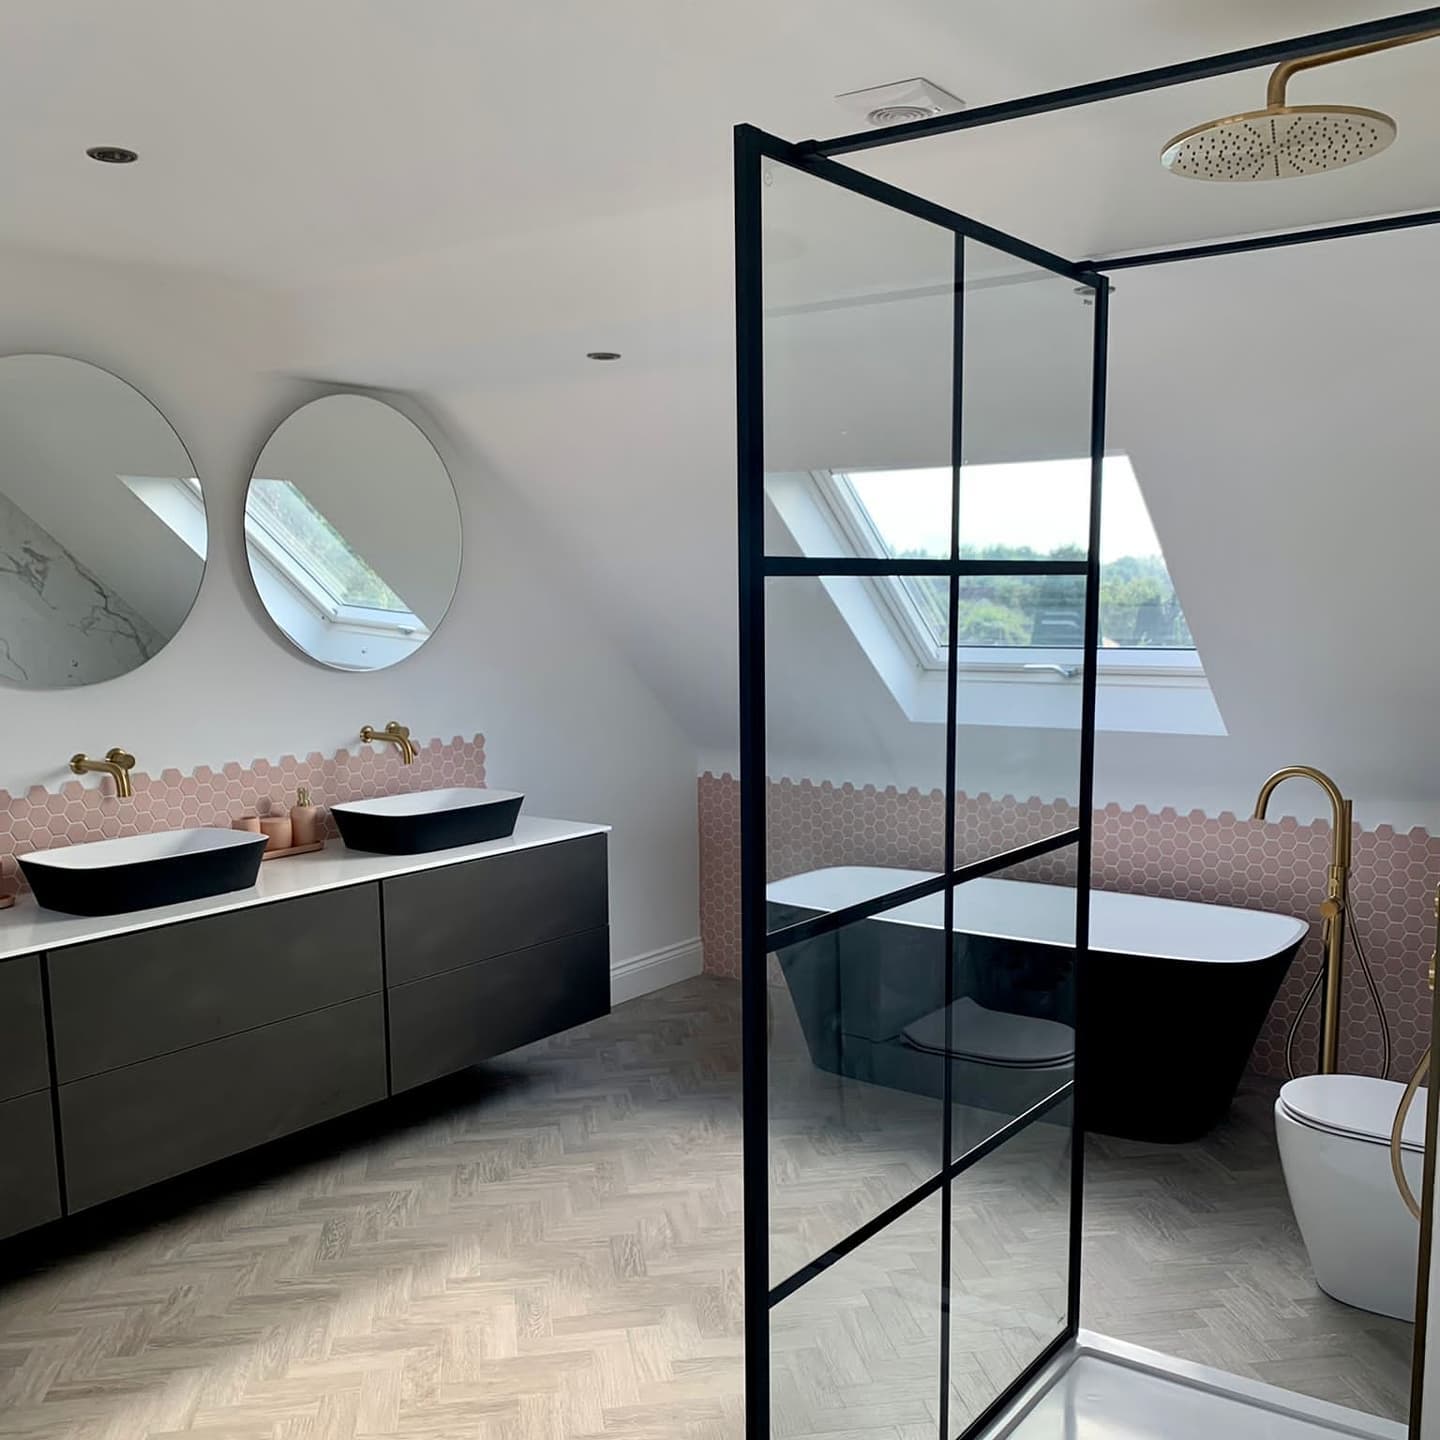 A stylish bathroom ensuite in a loft conversion bedroom built by topflite loft conversions in northwest england